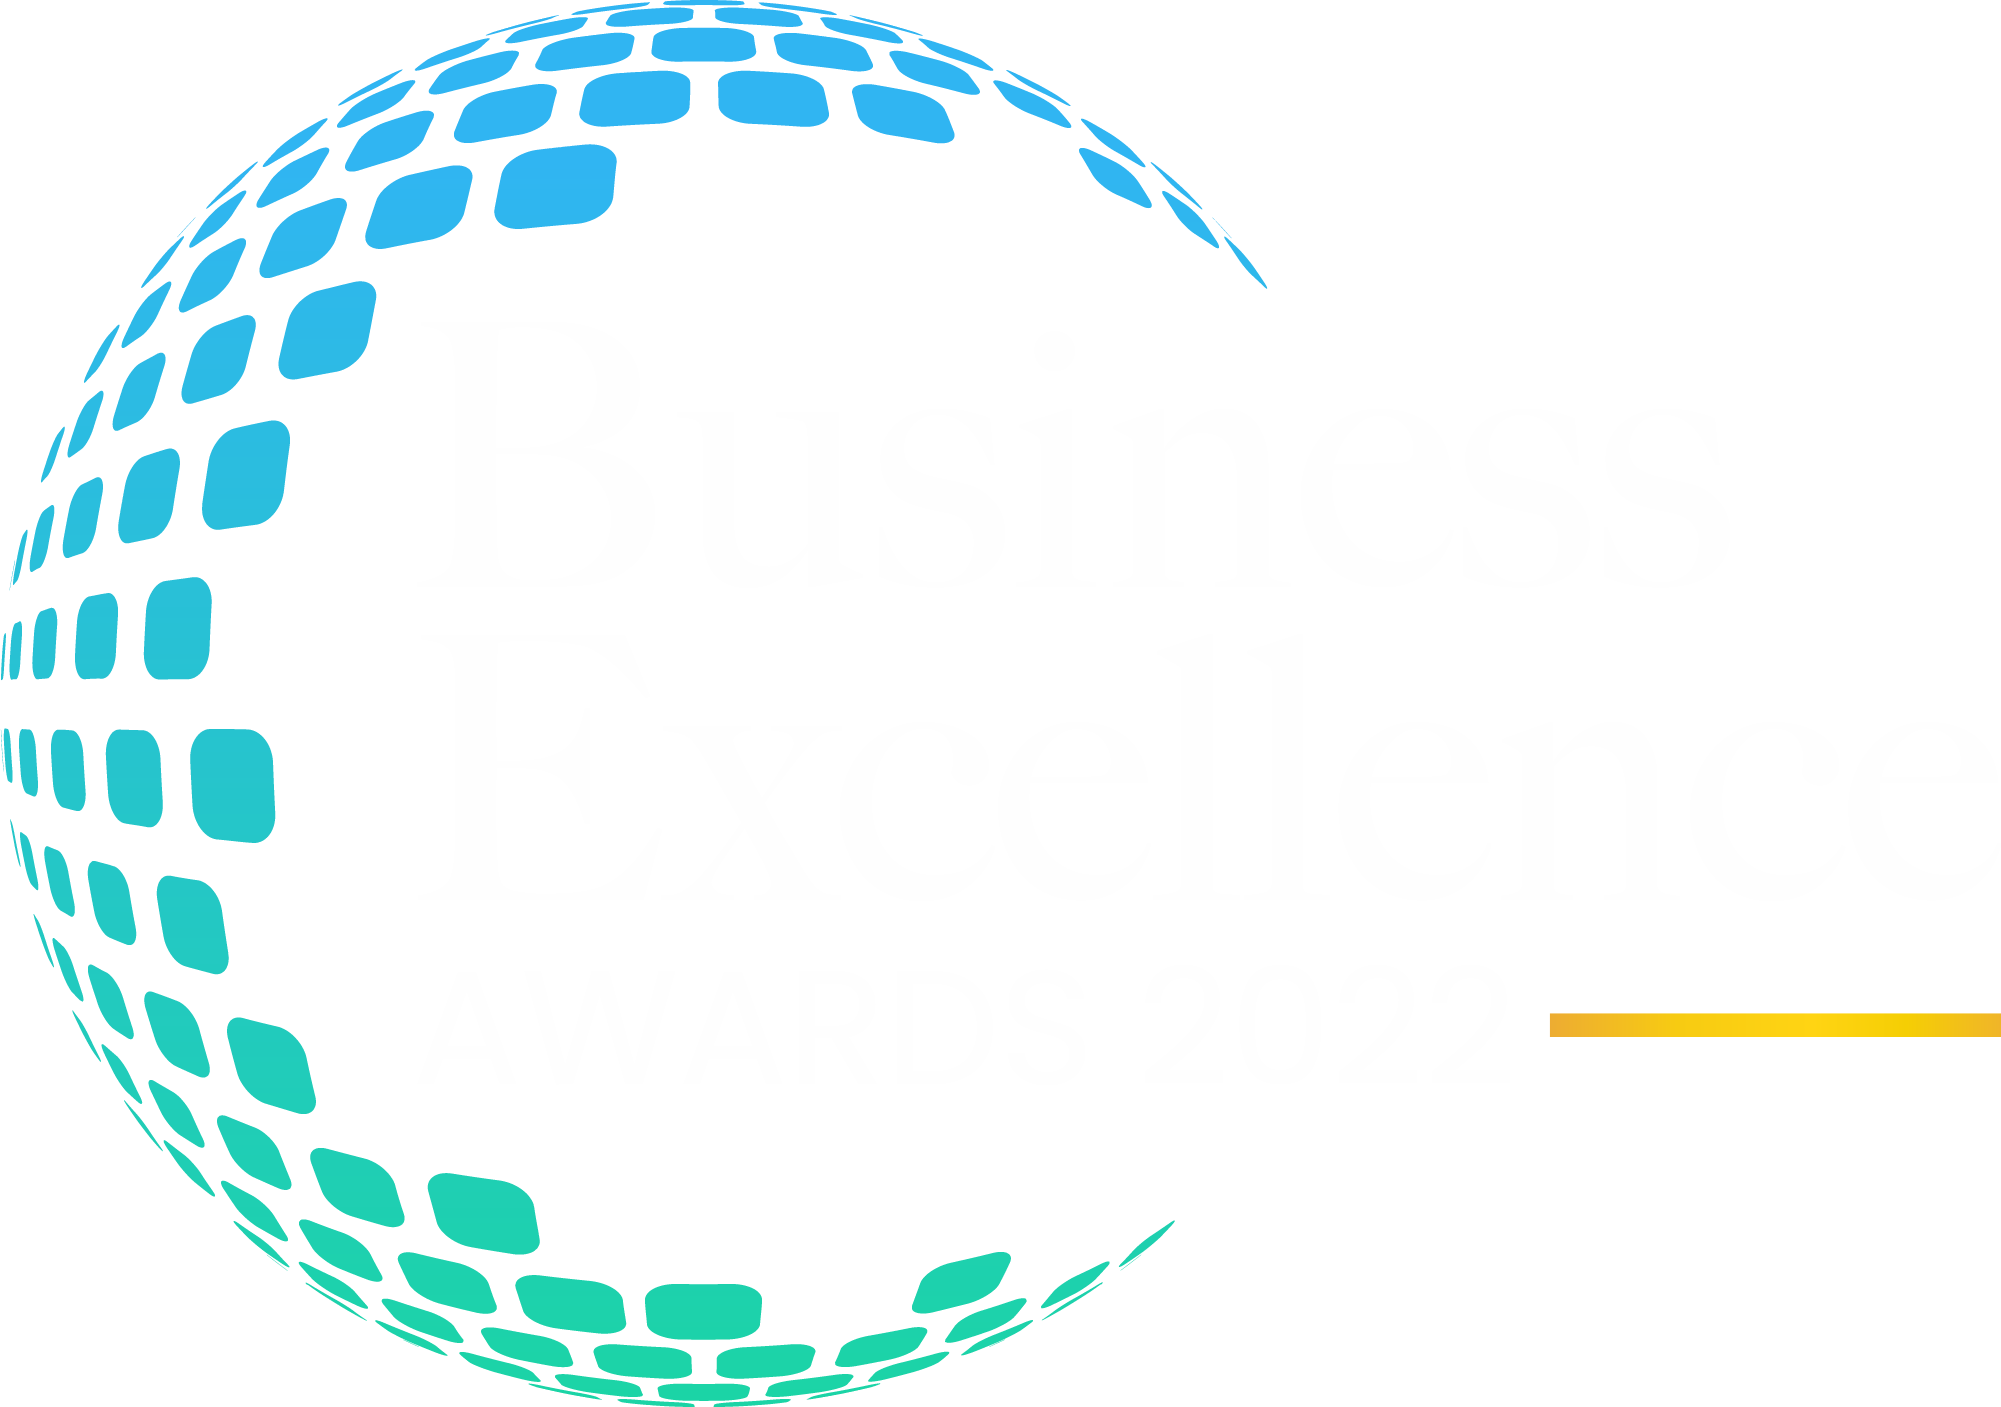 Business Excellence Award - 2022